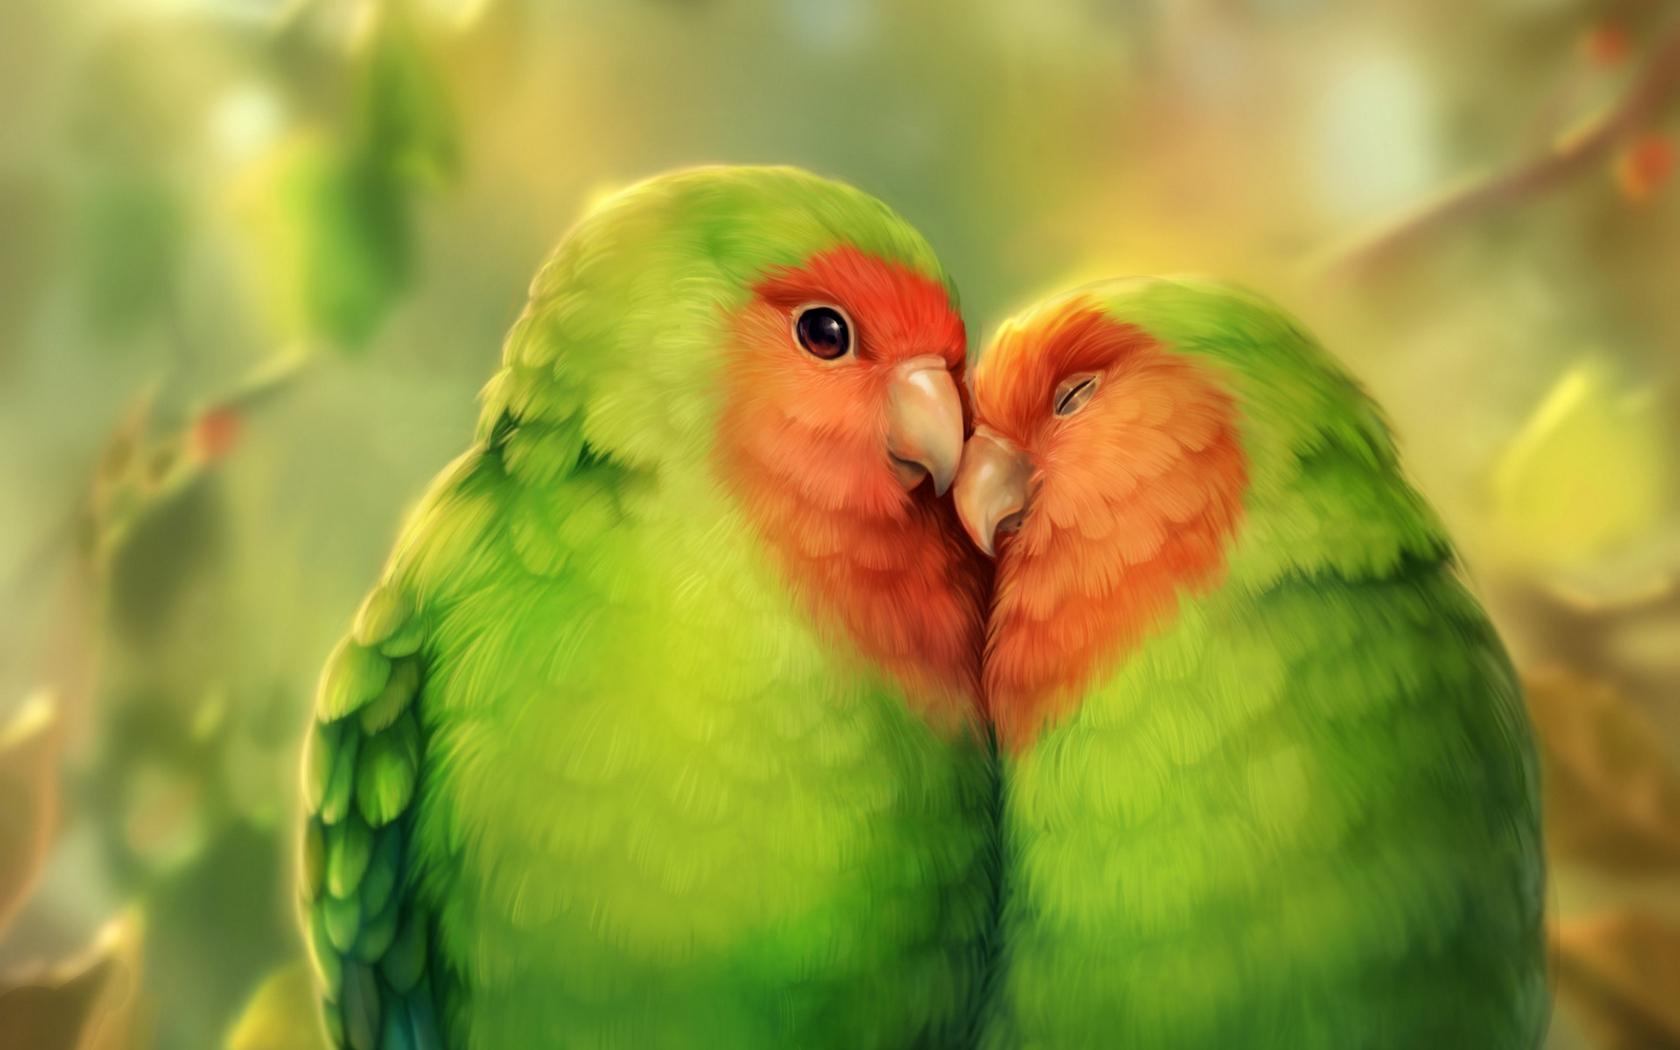 Parrot Hd Wallpaper Hd Wallpapers Images